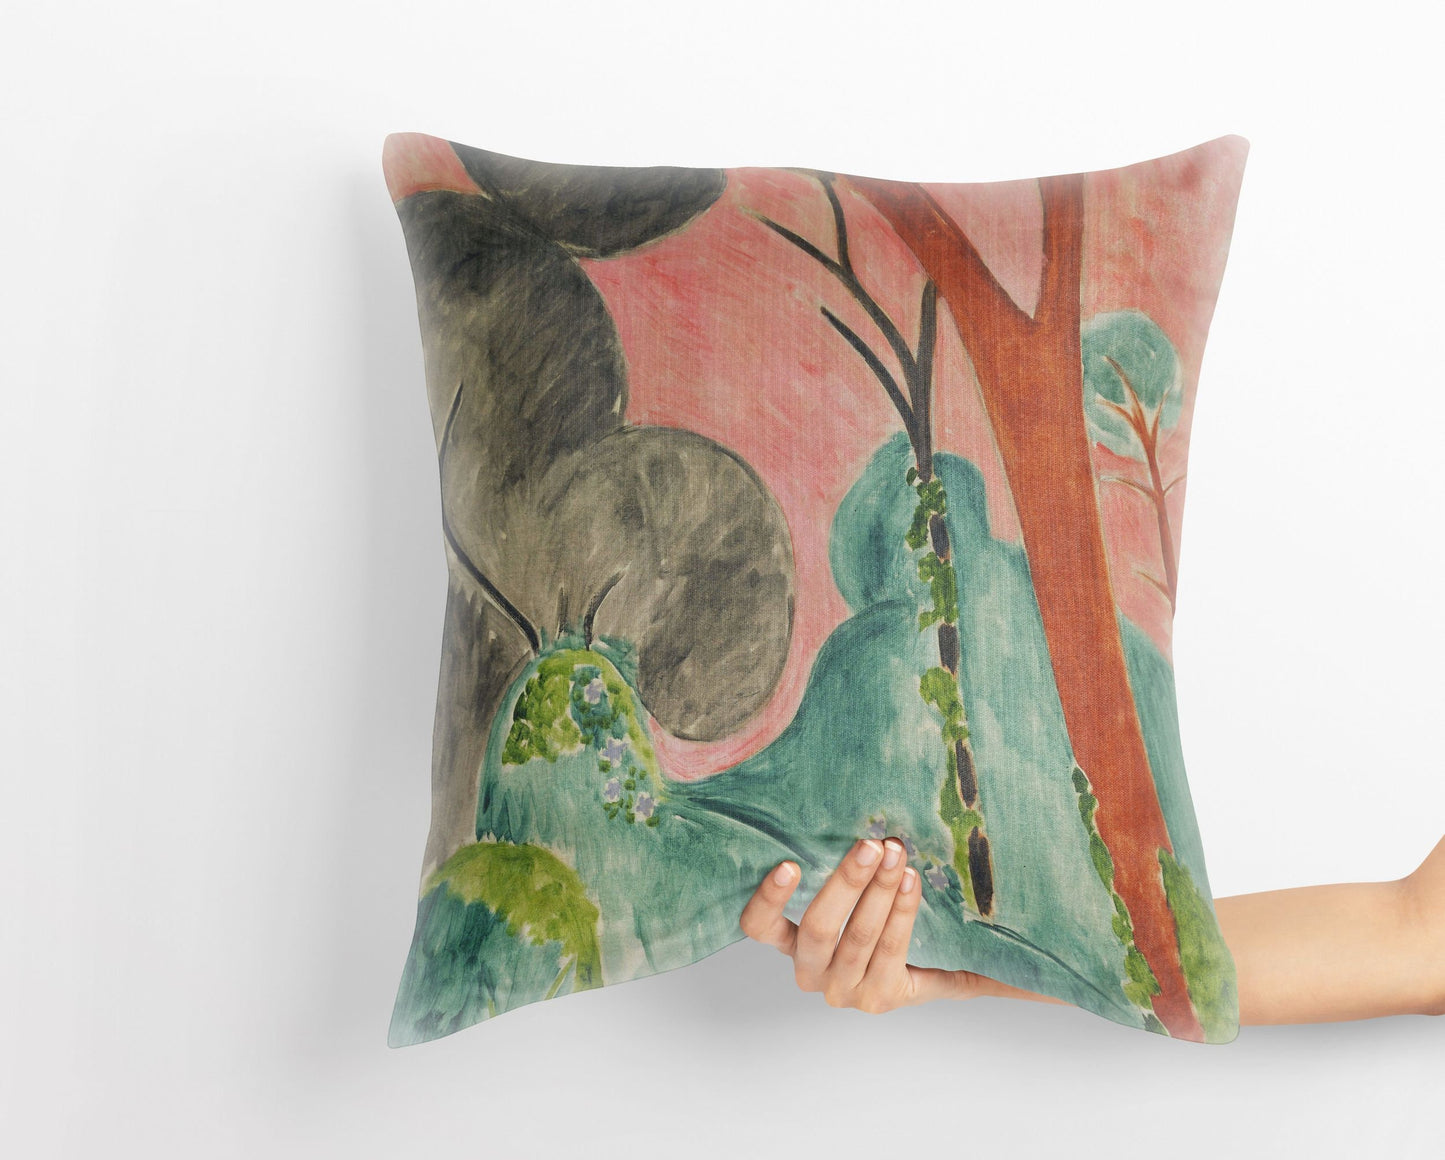 Henri Matisse Famous Painting, Tapestry Pillows, Abstract Throw Pillow, Designer Pillow, Fauvist Pillow, 18 X 18 Pillow Covers